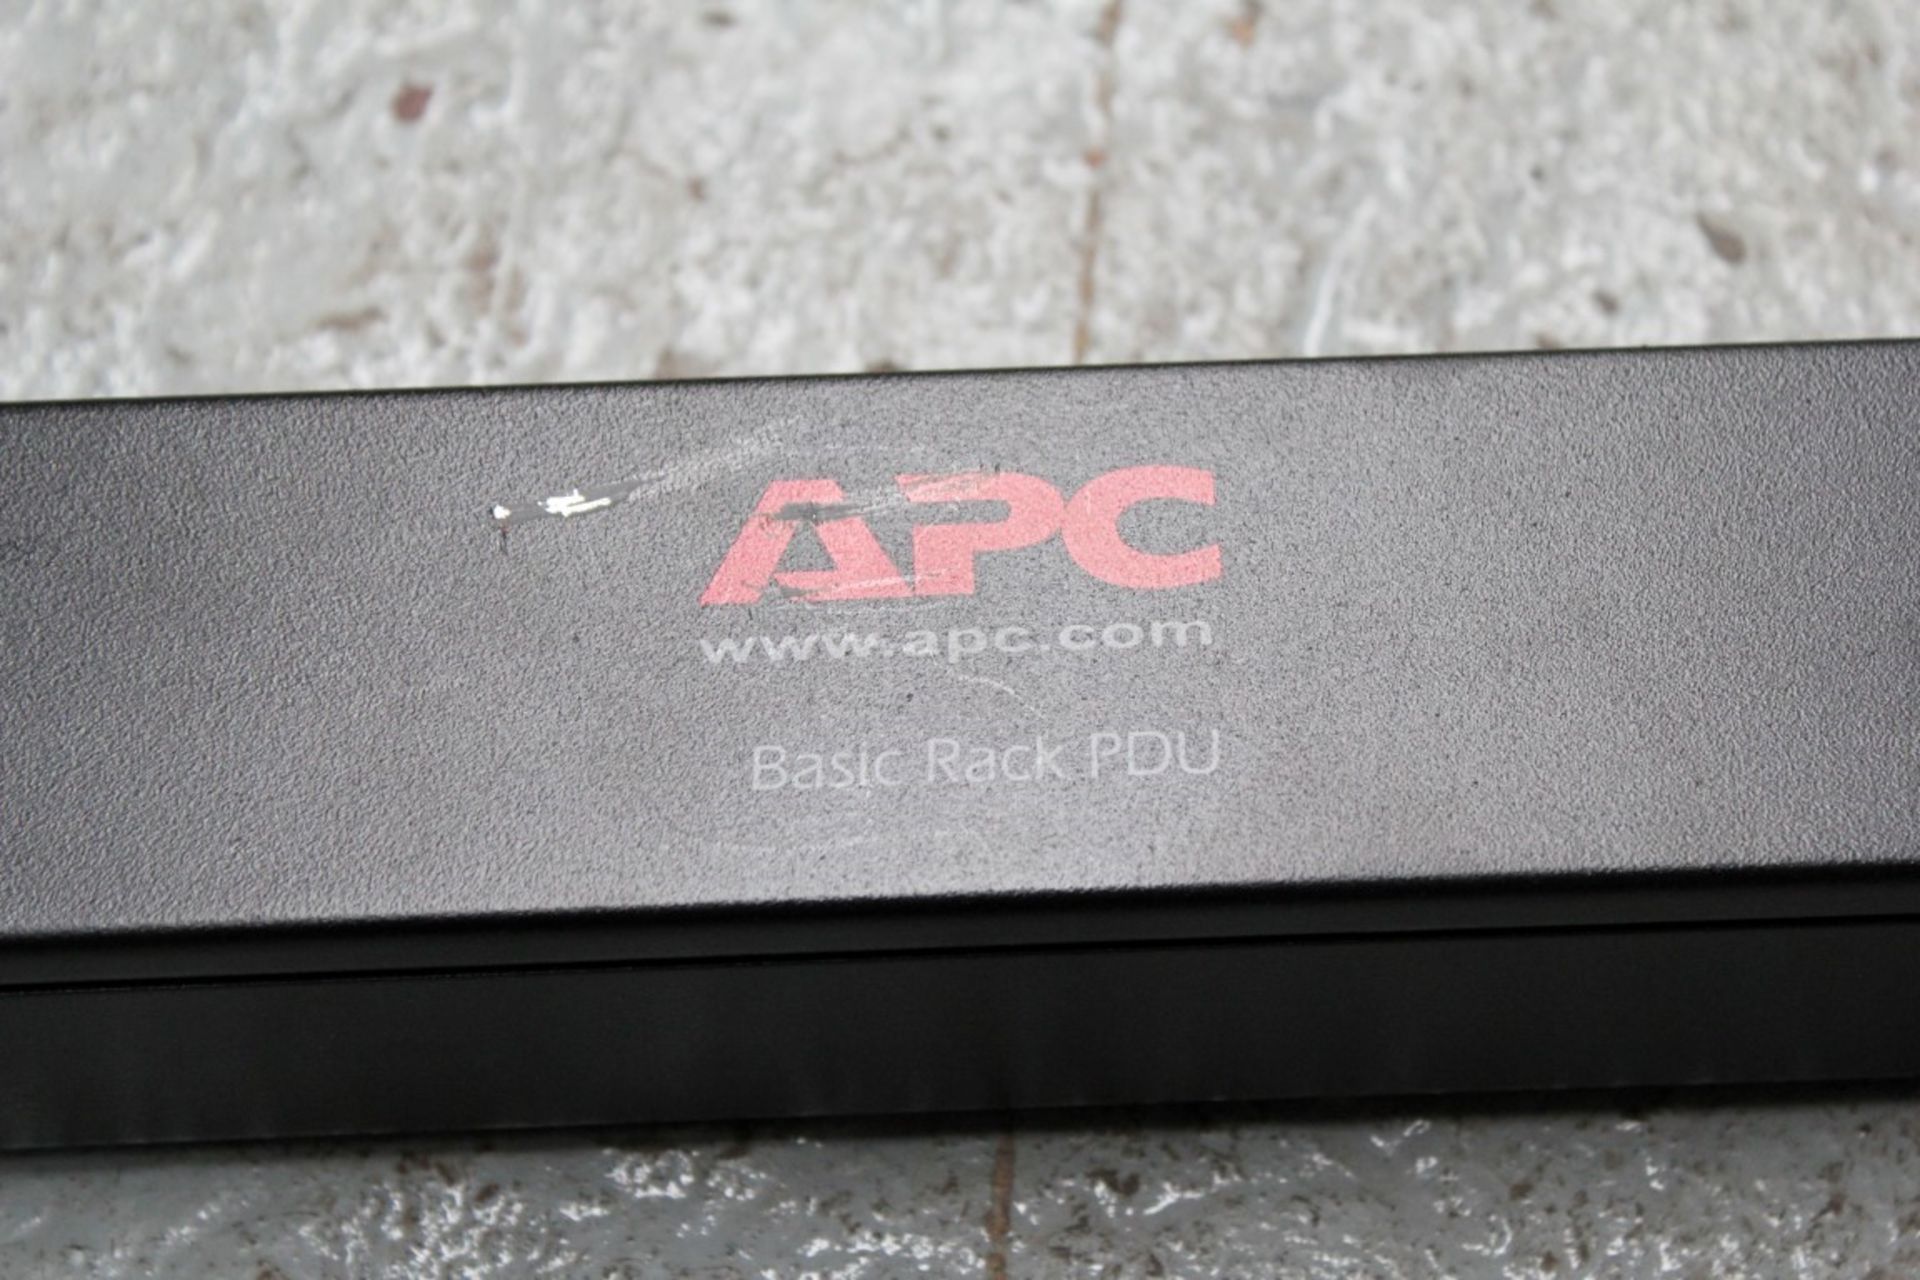 1 x APC Basic Rack Power Distribution Unit PDU - Model AP7553 - 230V 32A - CL106 - Removed From - Image 5 of 5